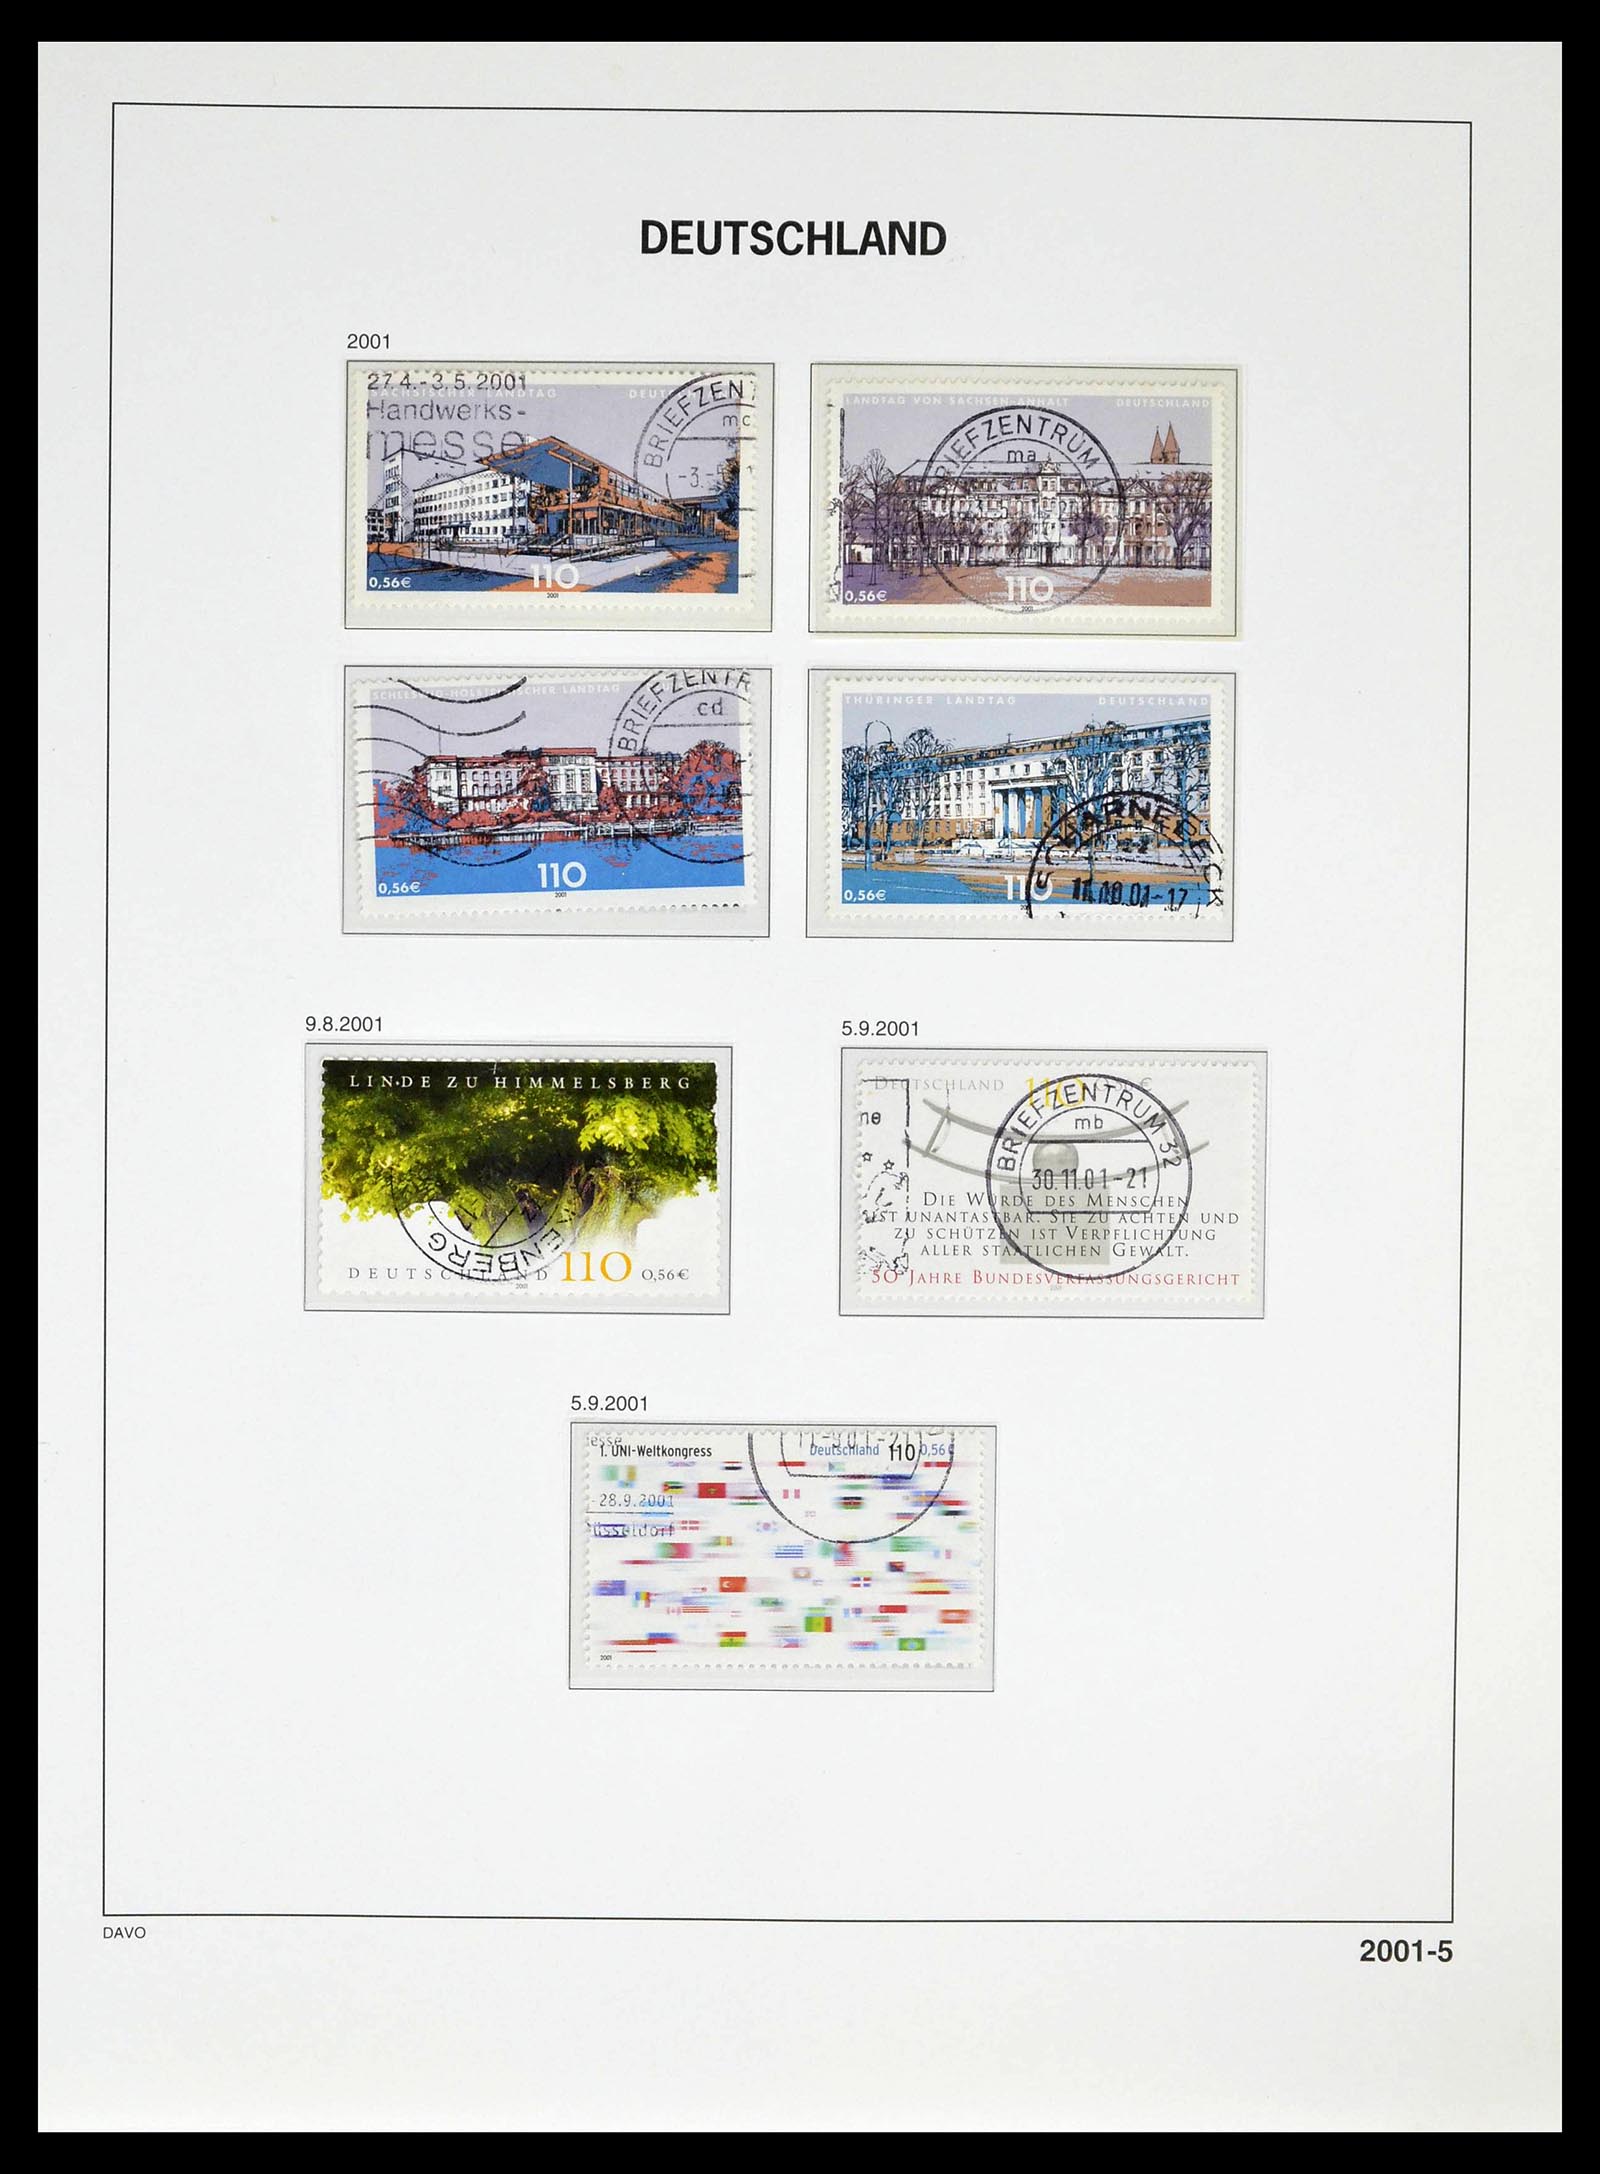 39326 0208 - Stamp collection 39326 Bundespost 1949-2003.